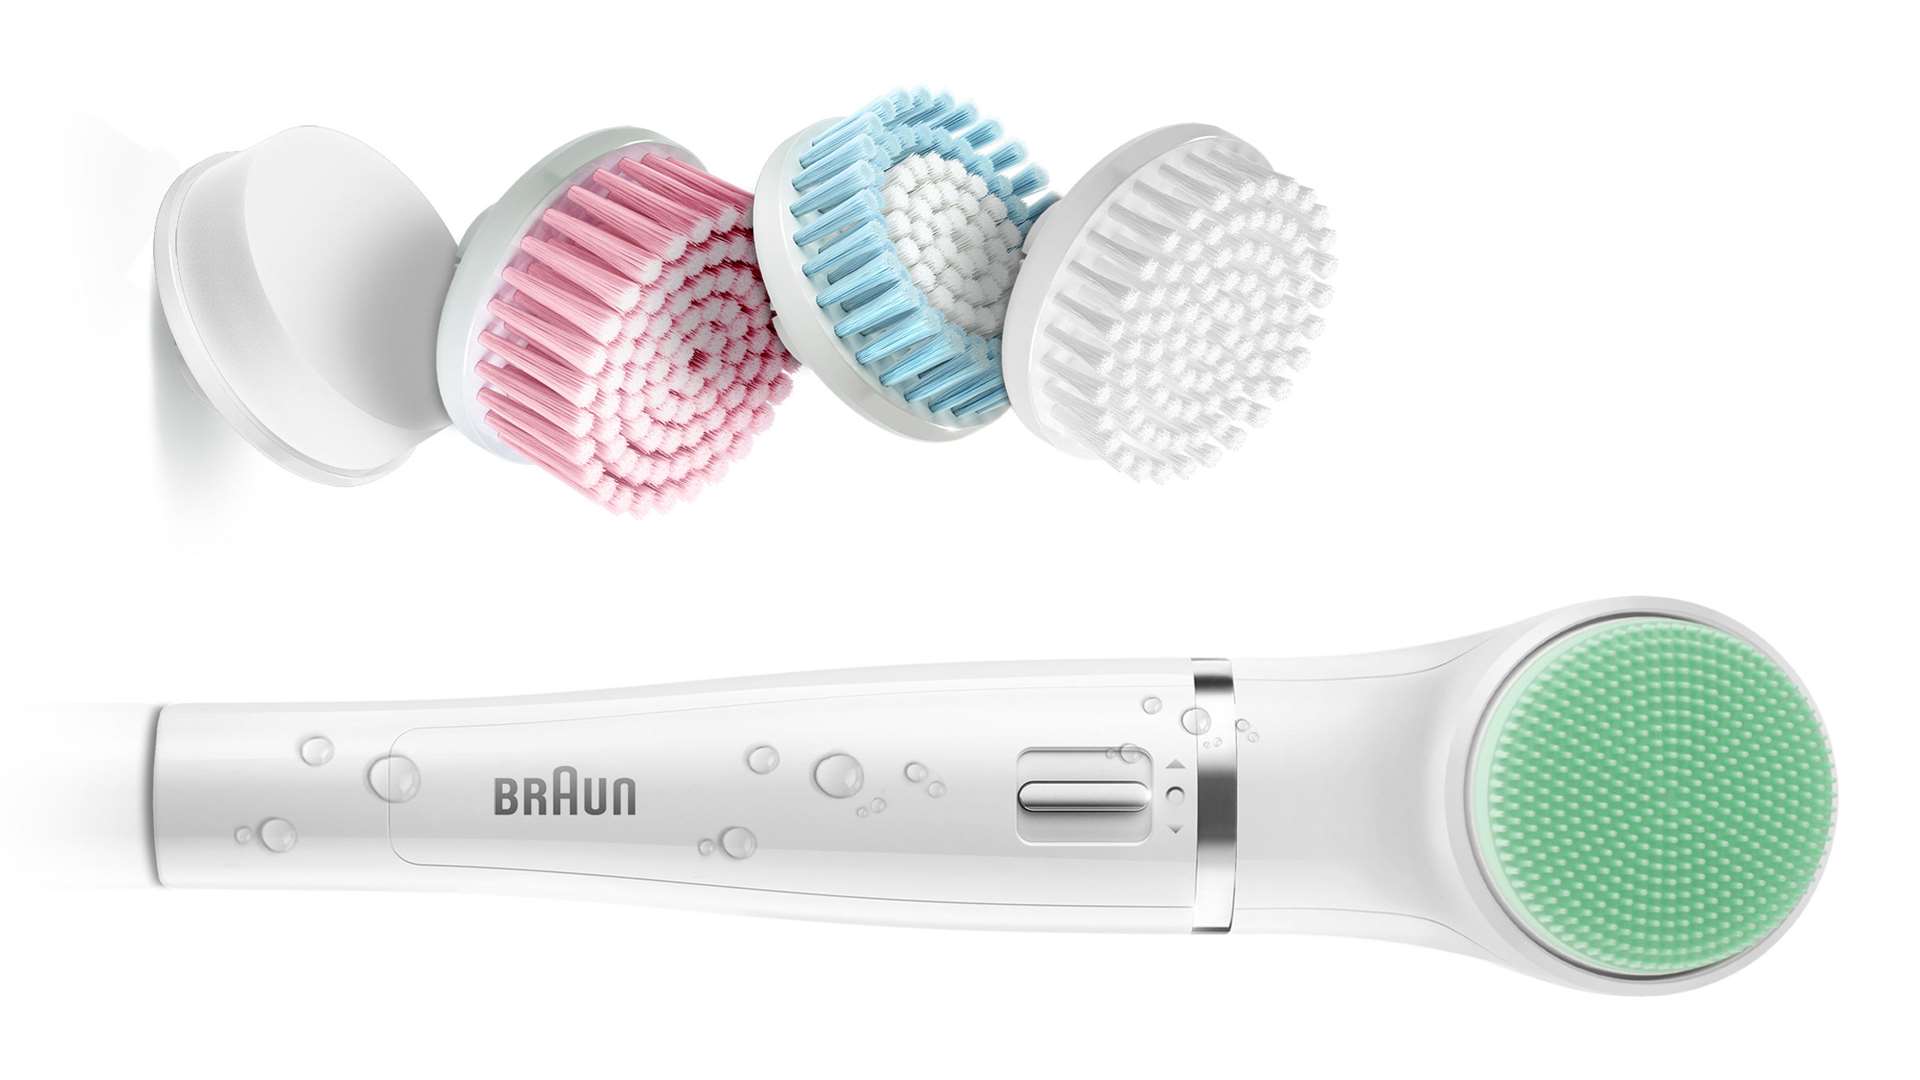 TOP BUY: Braun Face Spa, £41.99 (currently reduced from £44.99), Argos